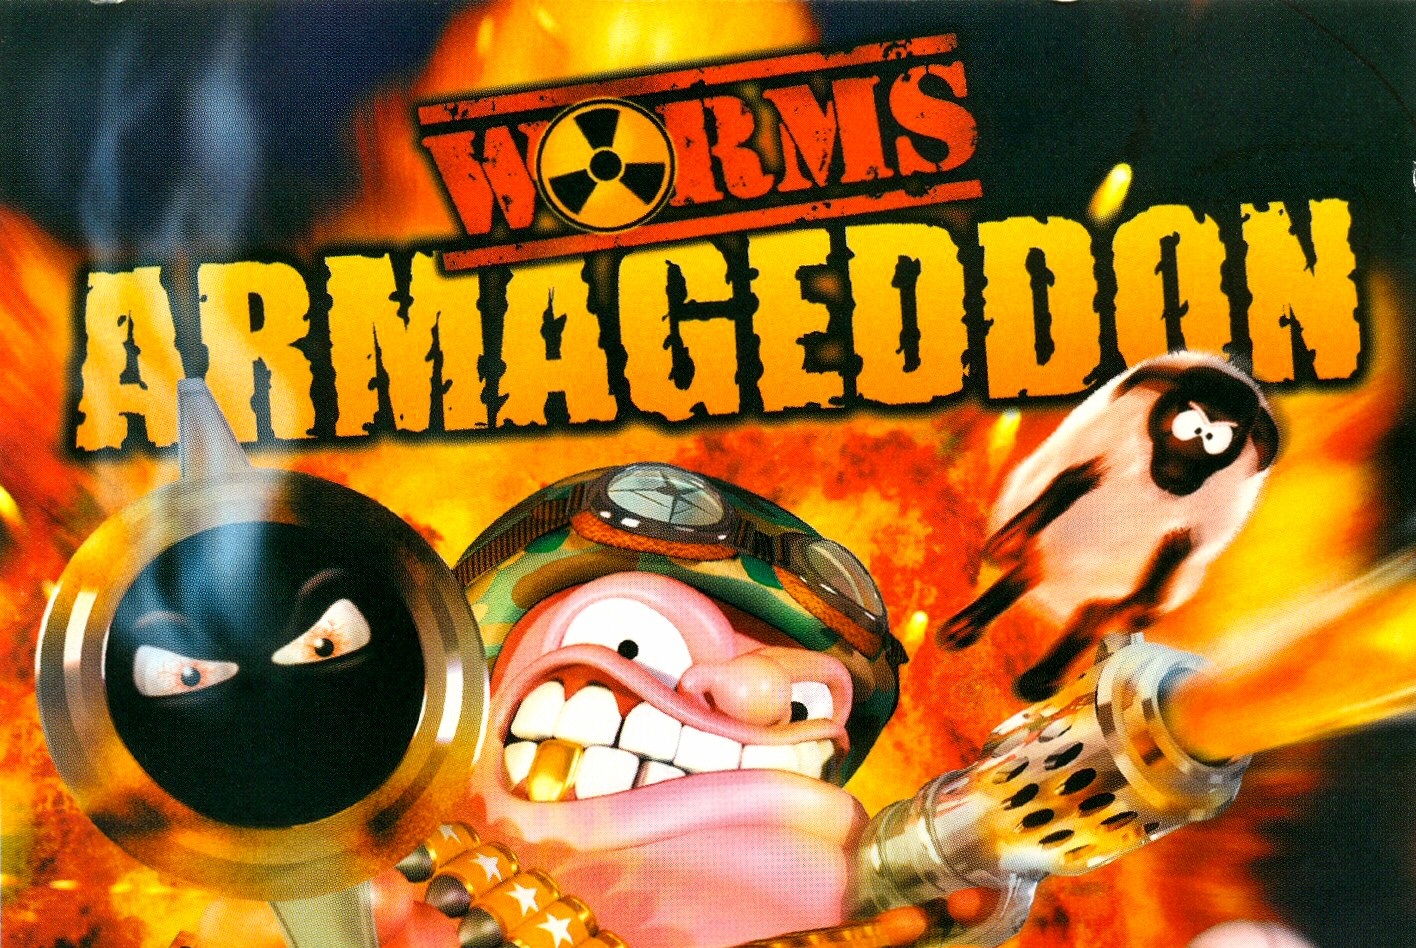 download worms evercade for free